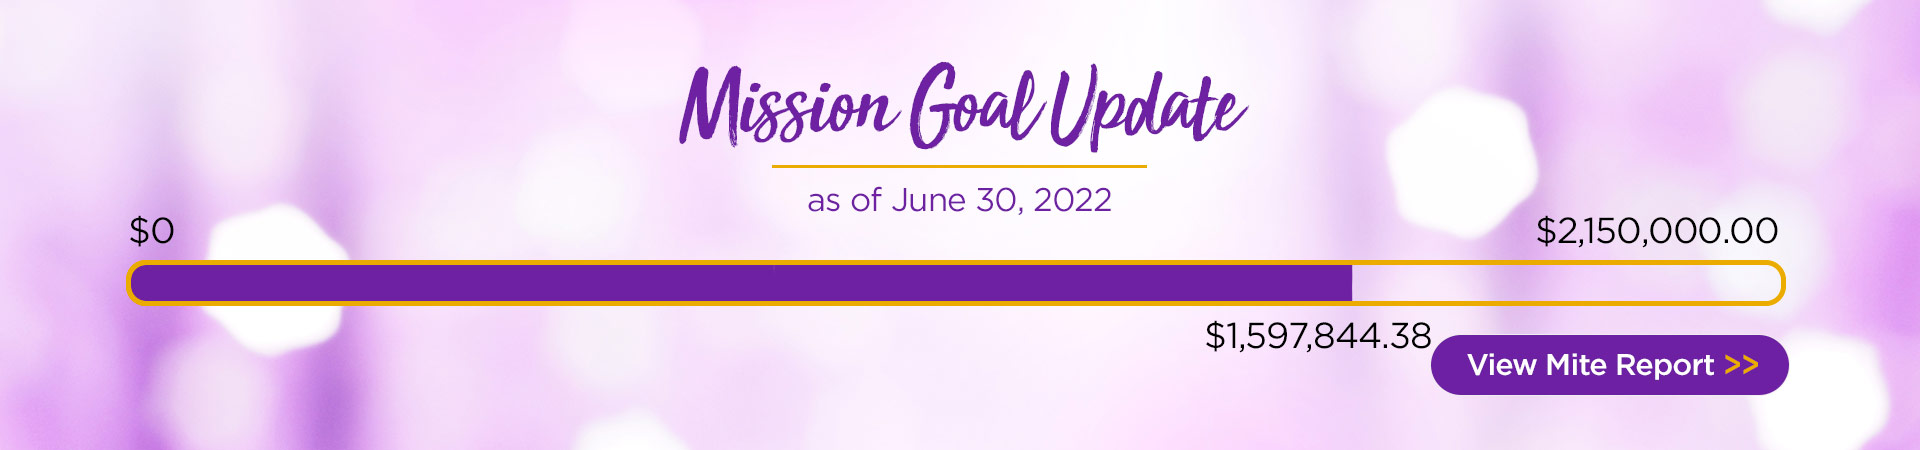 Mission Goal Update as of June 30, 2022. View Mite Report.